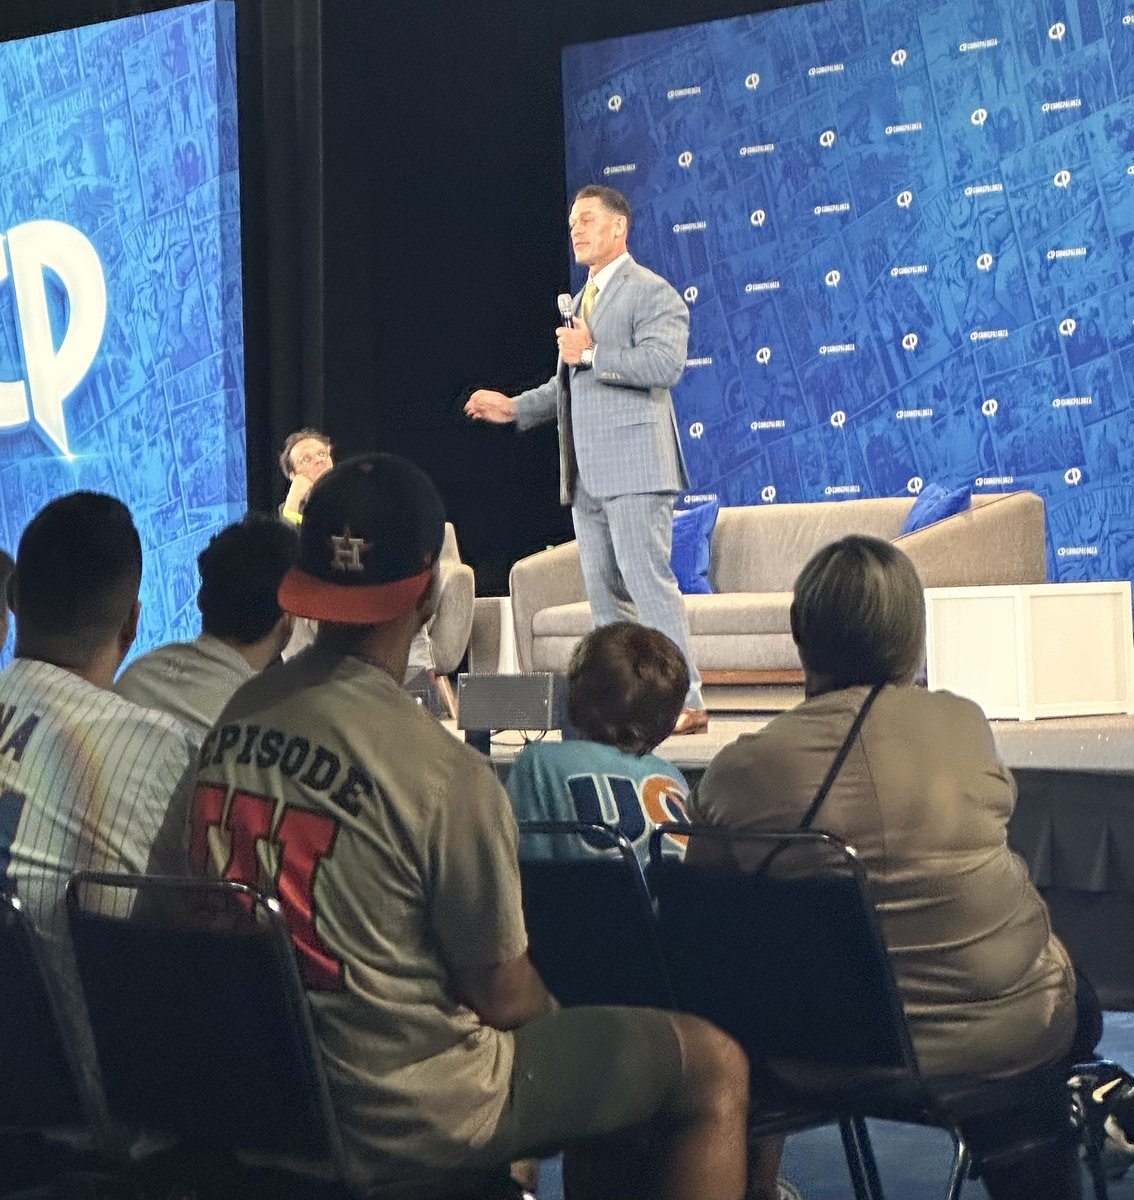 The Champ is here panel with John Cena is going on now in the General Assembly. Were you here for this epic experience? There is still time left in the day to get your photos and autographs!